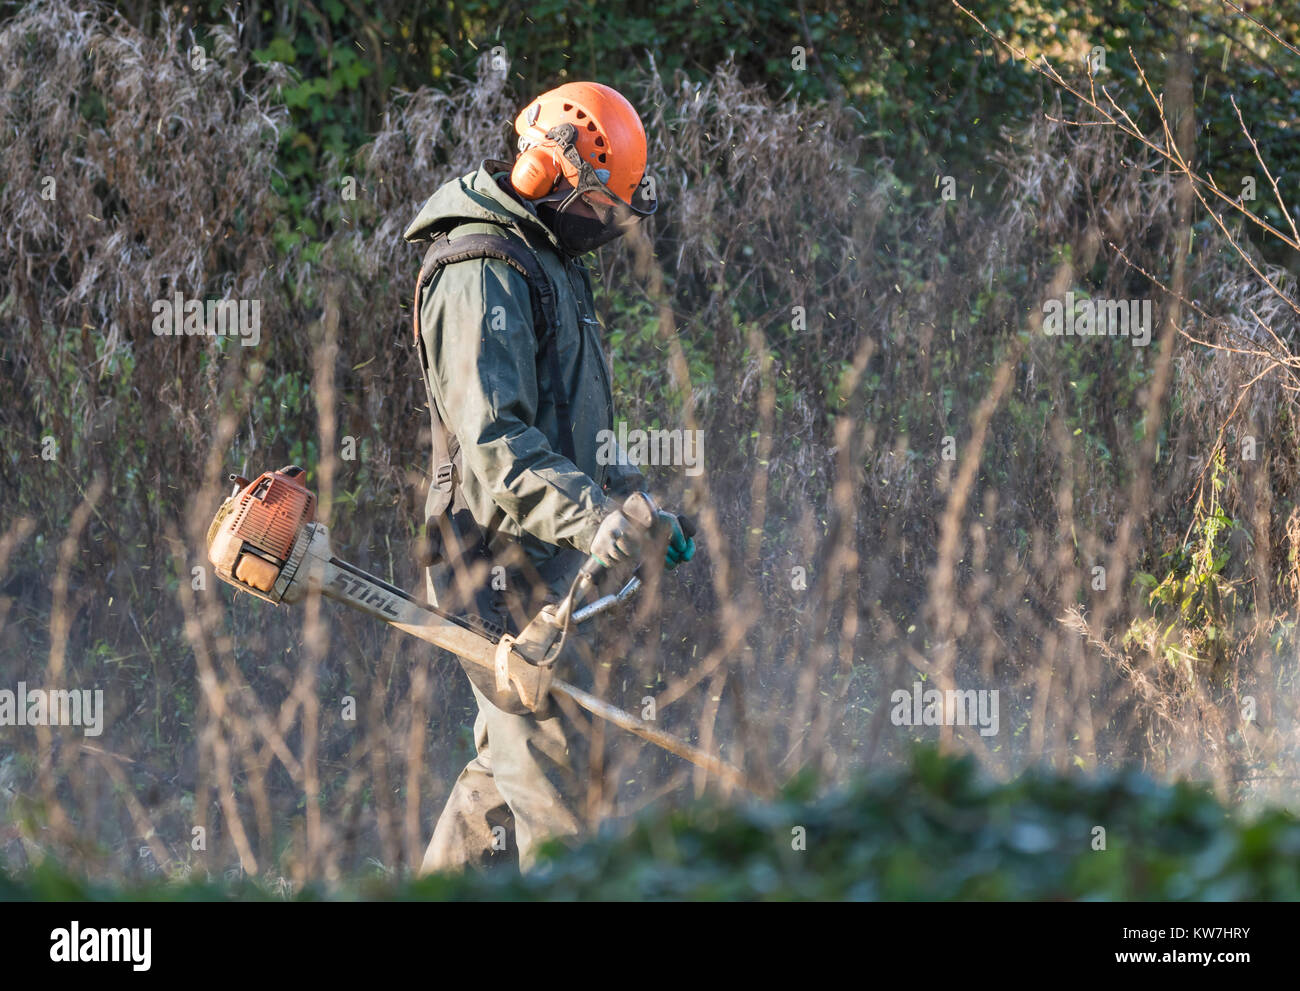 Man using a petrol powered STIHL Brushcutter in Winter, wearing protective clothing, helmet and face mask, in overgrowth in woodland in the UK. Stock Photo